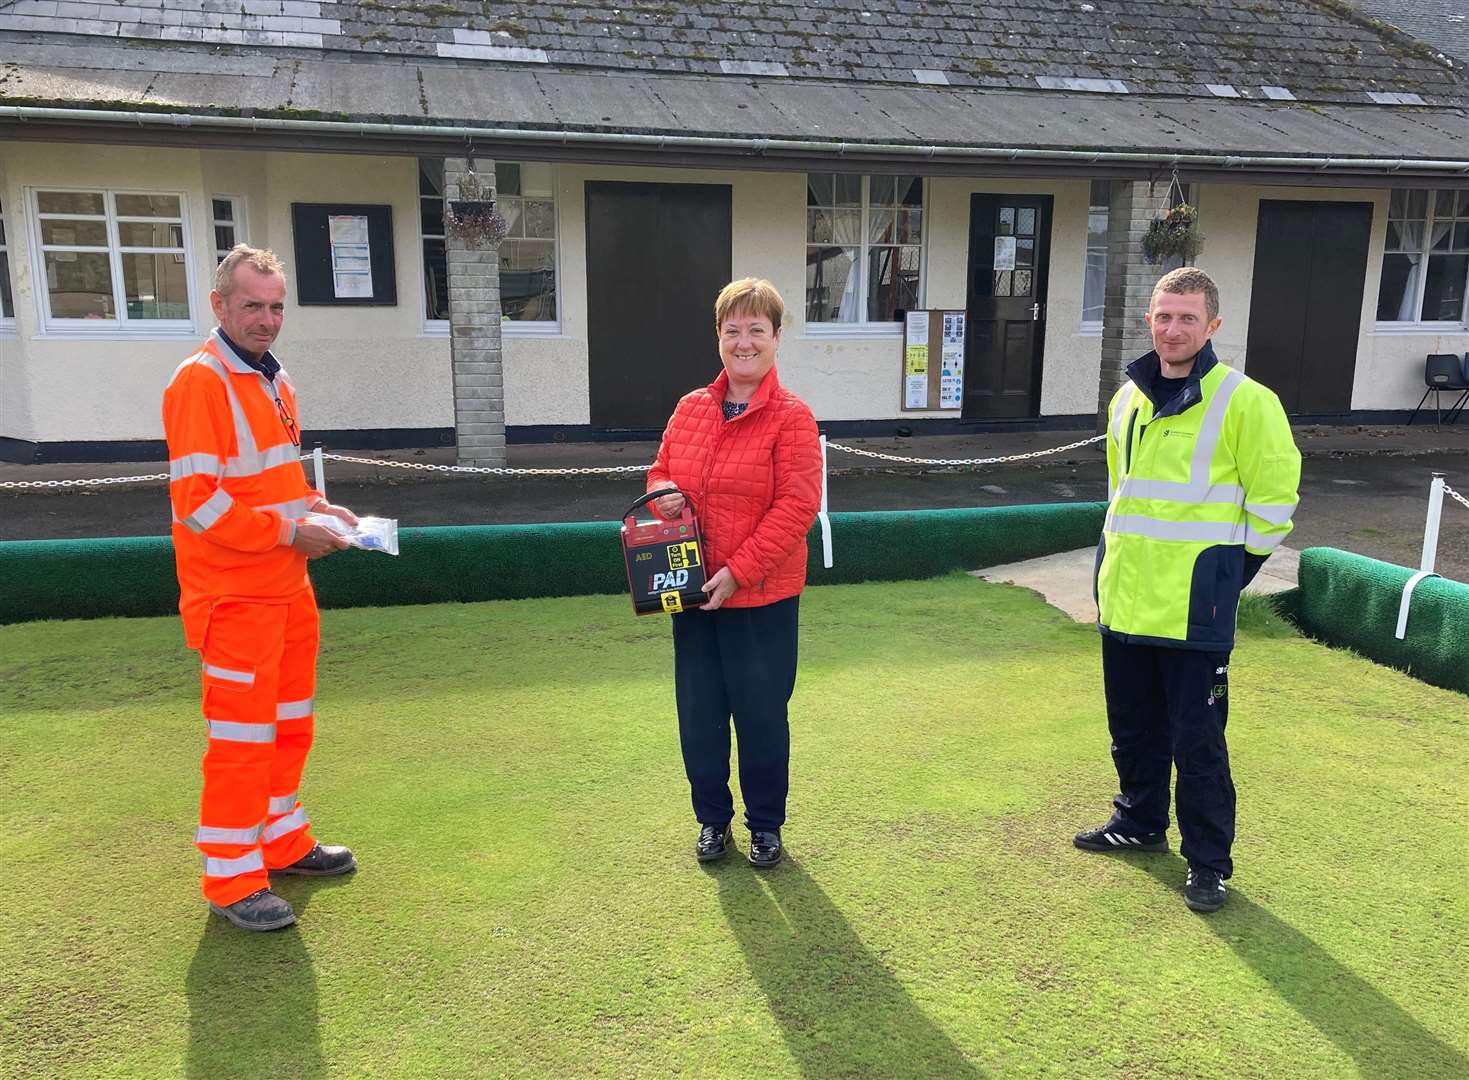 BAM site foreman Paul McQuade (left) and Andrew Henderson (right), SSEN Transmission construction manager, presenting the defibrillator to Sharon Rosie, a member of the Rosebank Bowling Club, who accepted it on behalf of all at Rosebank/Wick Youth Hub.